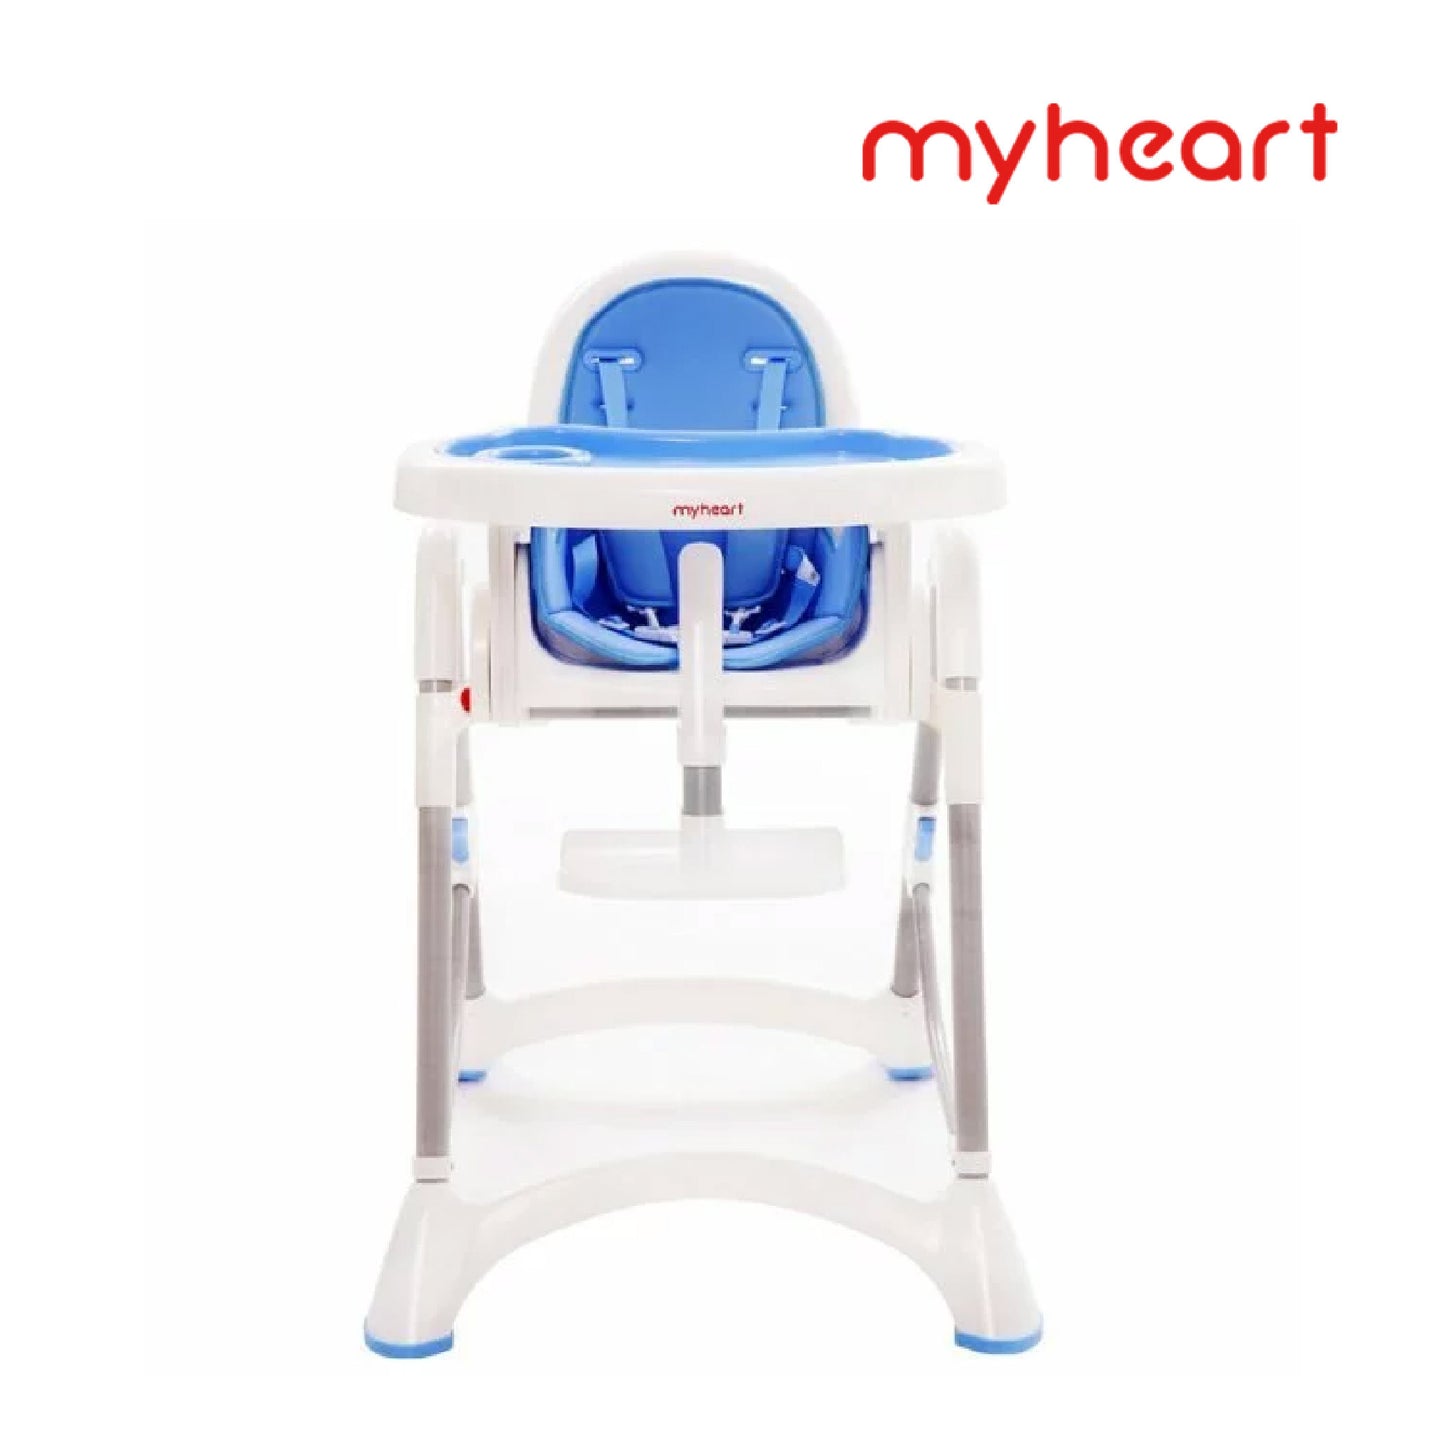 【myheart】Folding child safety dining chair-sky blue